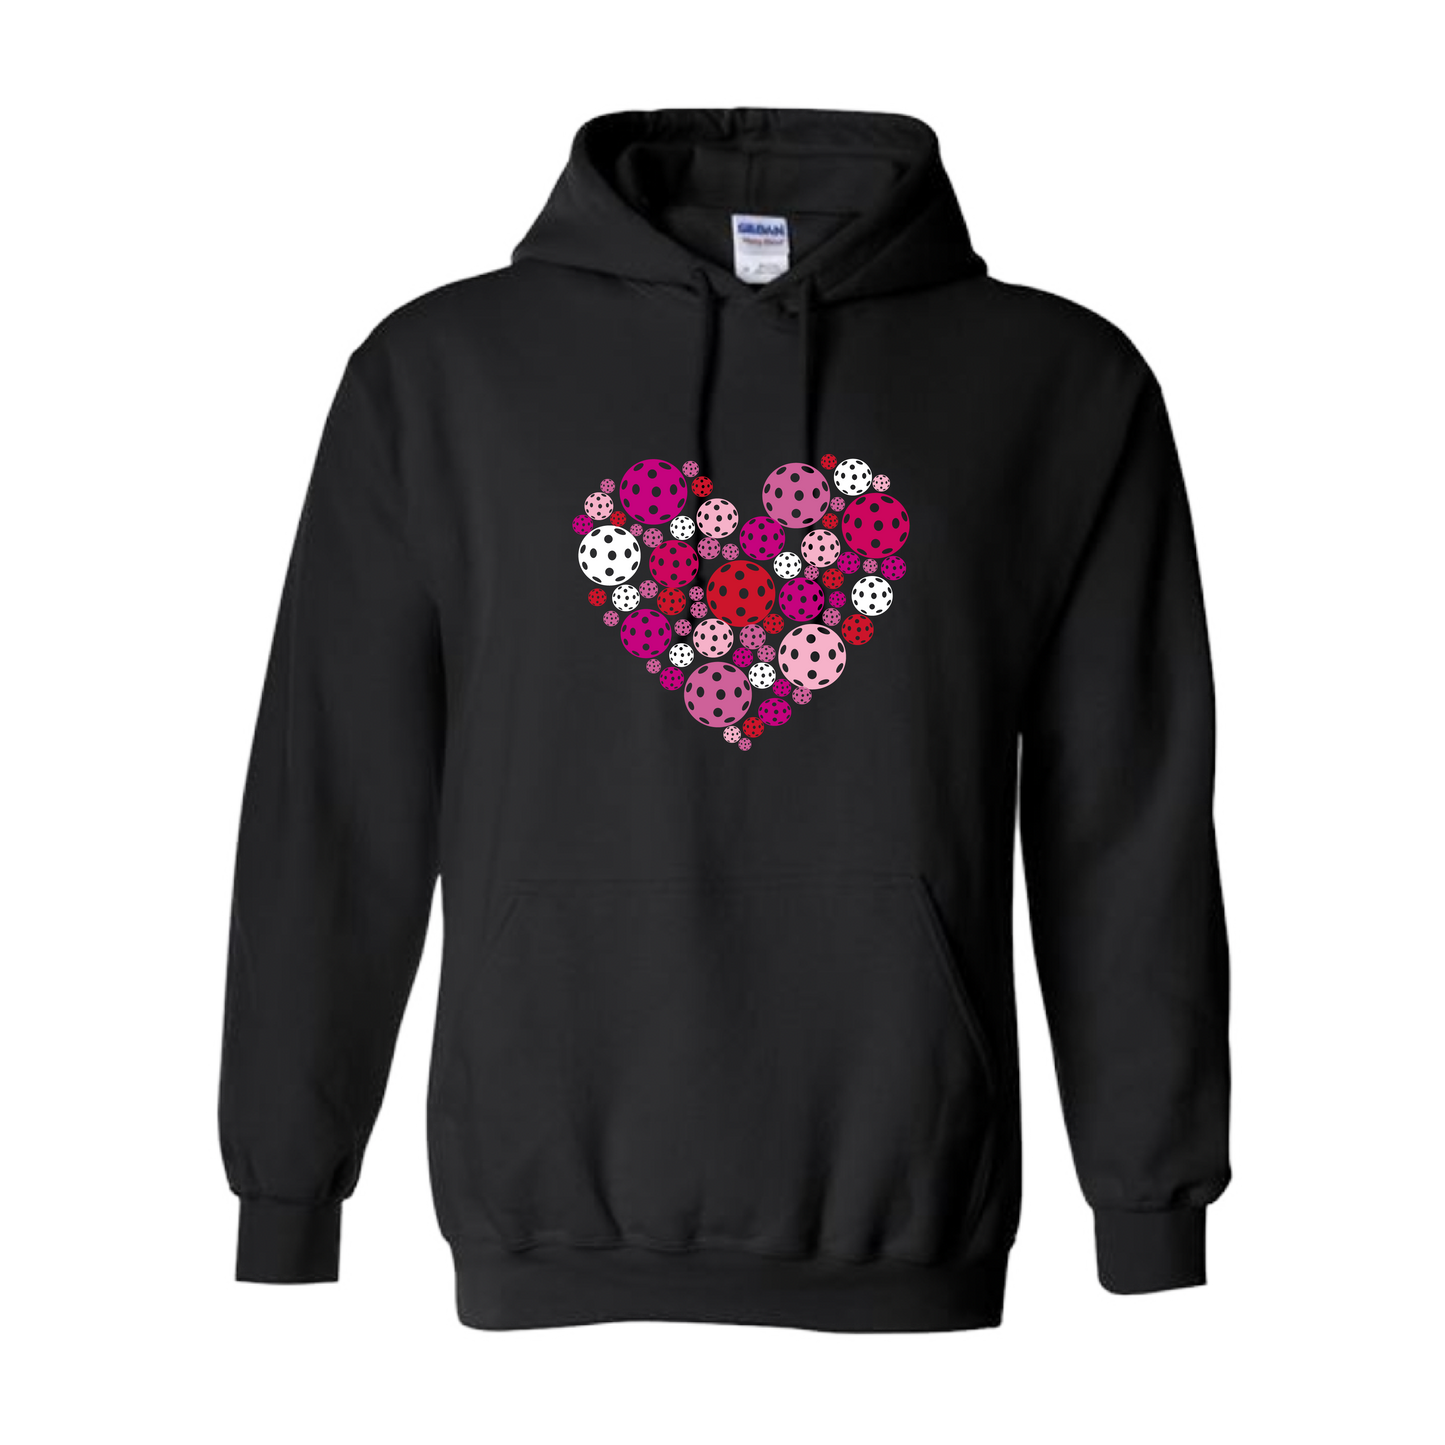 This unisex hooded sweatshirt combines comfort and breathability, featuring a moisture-wicking, double-lined hood and front pouch pocket. It's perfect for staying warm on the Pickleball courts while showing off a unique design.